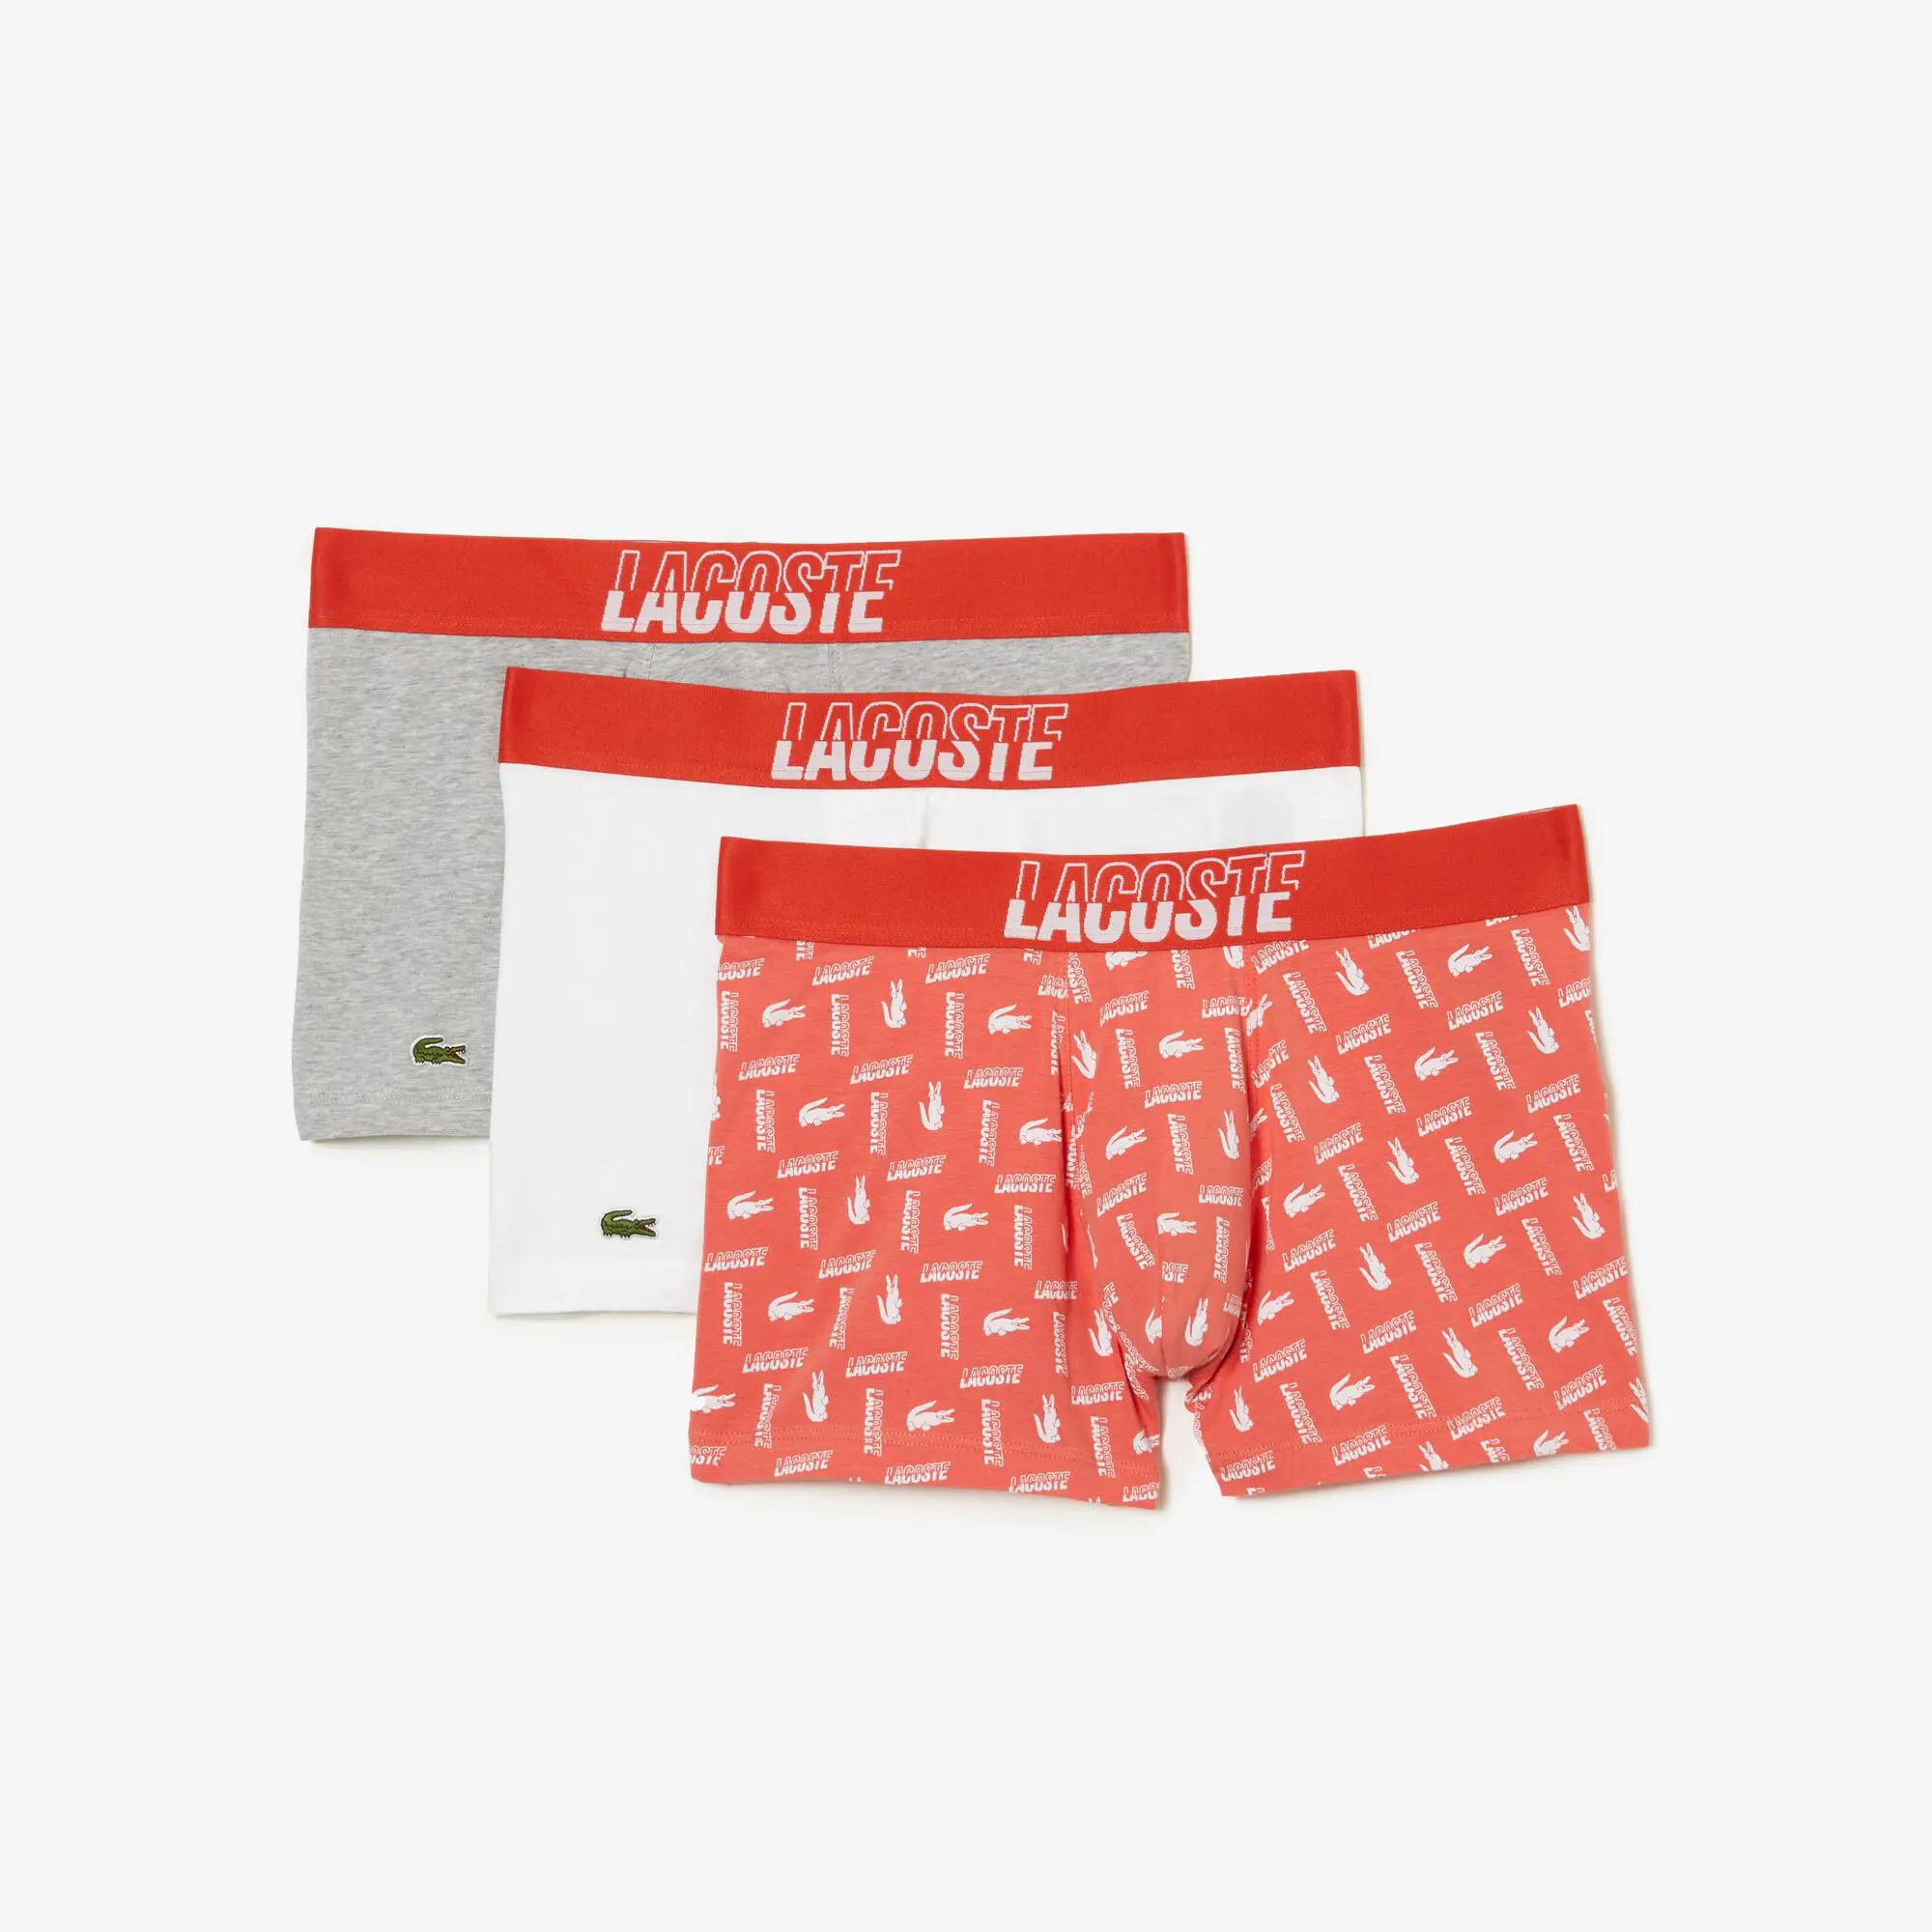 Lacoste Men’s 3-Pack Stretch Cotton Printed Trunks. 2